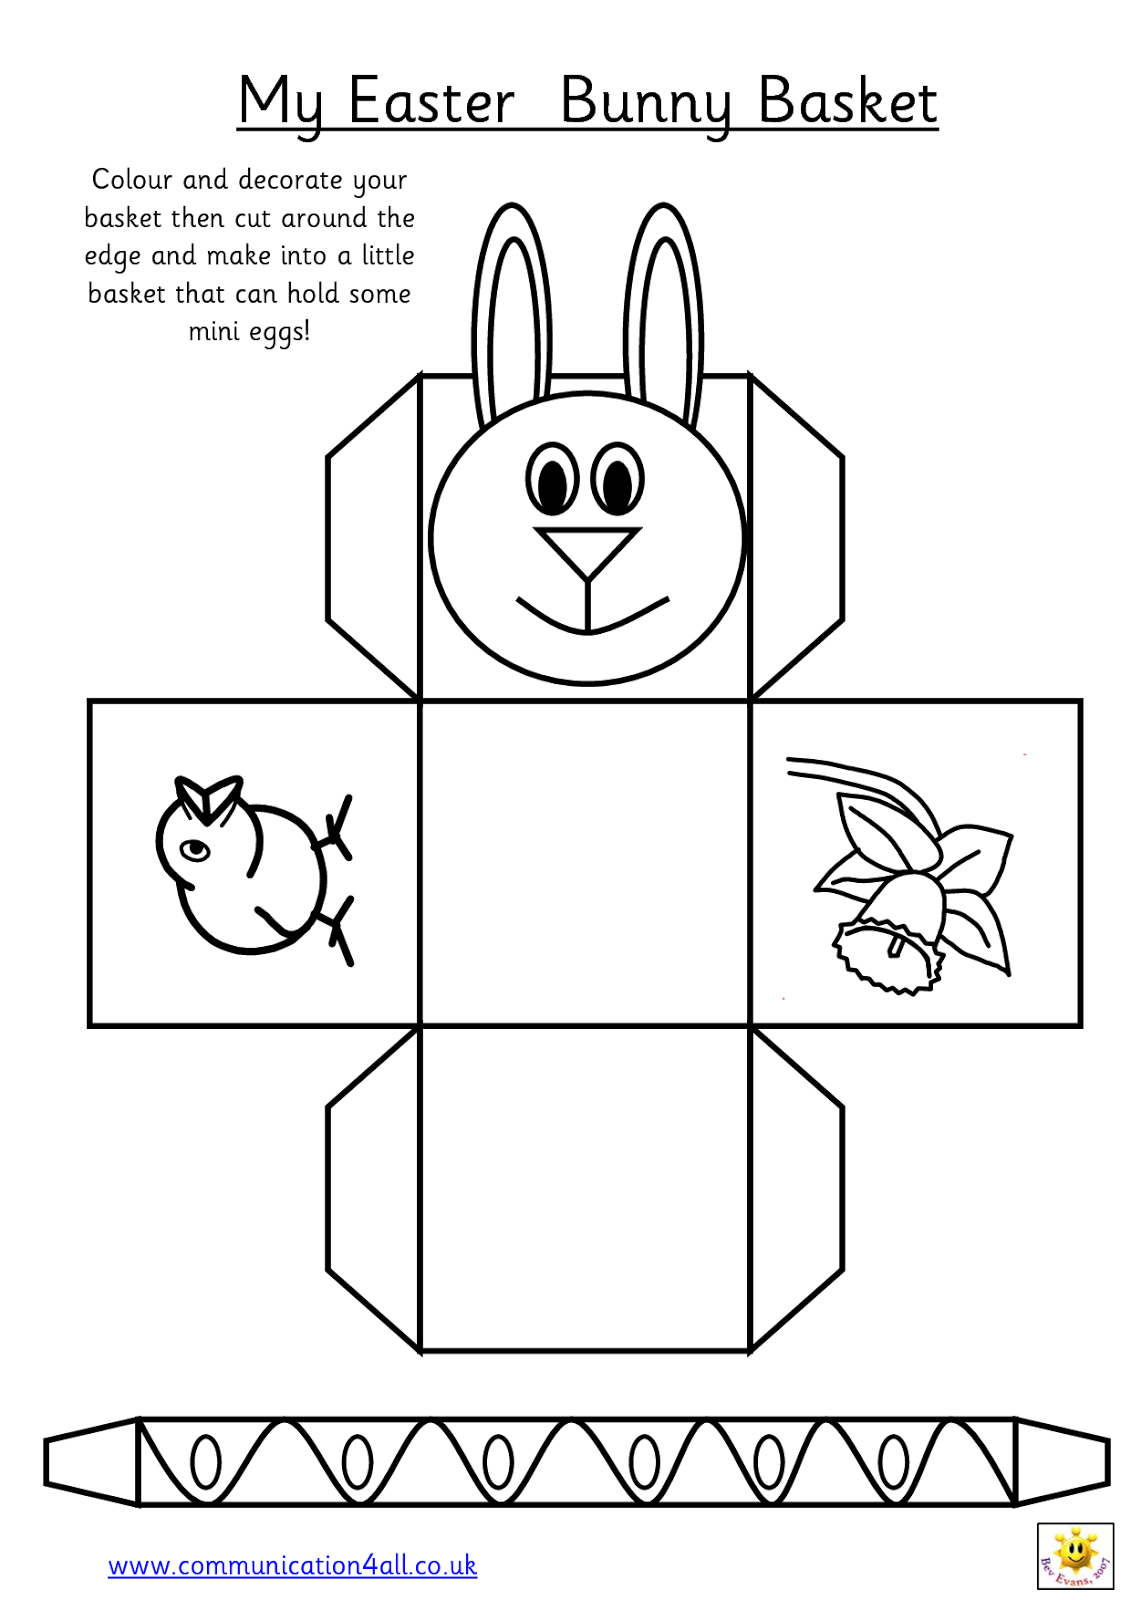 early play templates: Want to make a simple easter basket? Easter basket templates